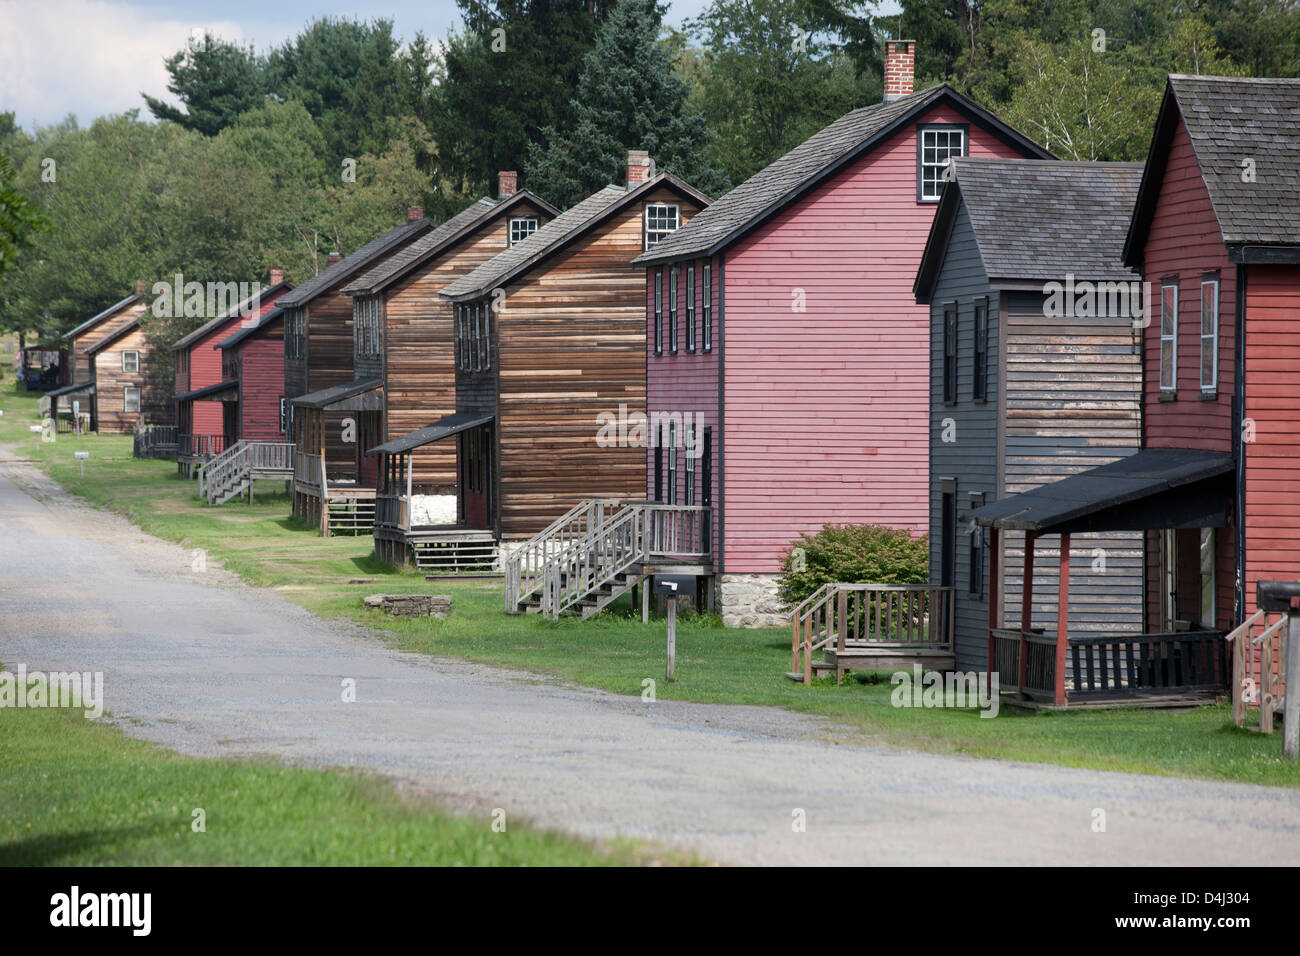 ROWS OF HOMES HISTORIC ECKLEY MINERS VILLAGE MUSEUM WEATHERLY POCONOS PENNSYLVANIA USA Stock Photo